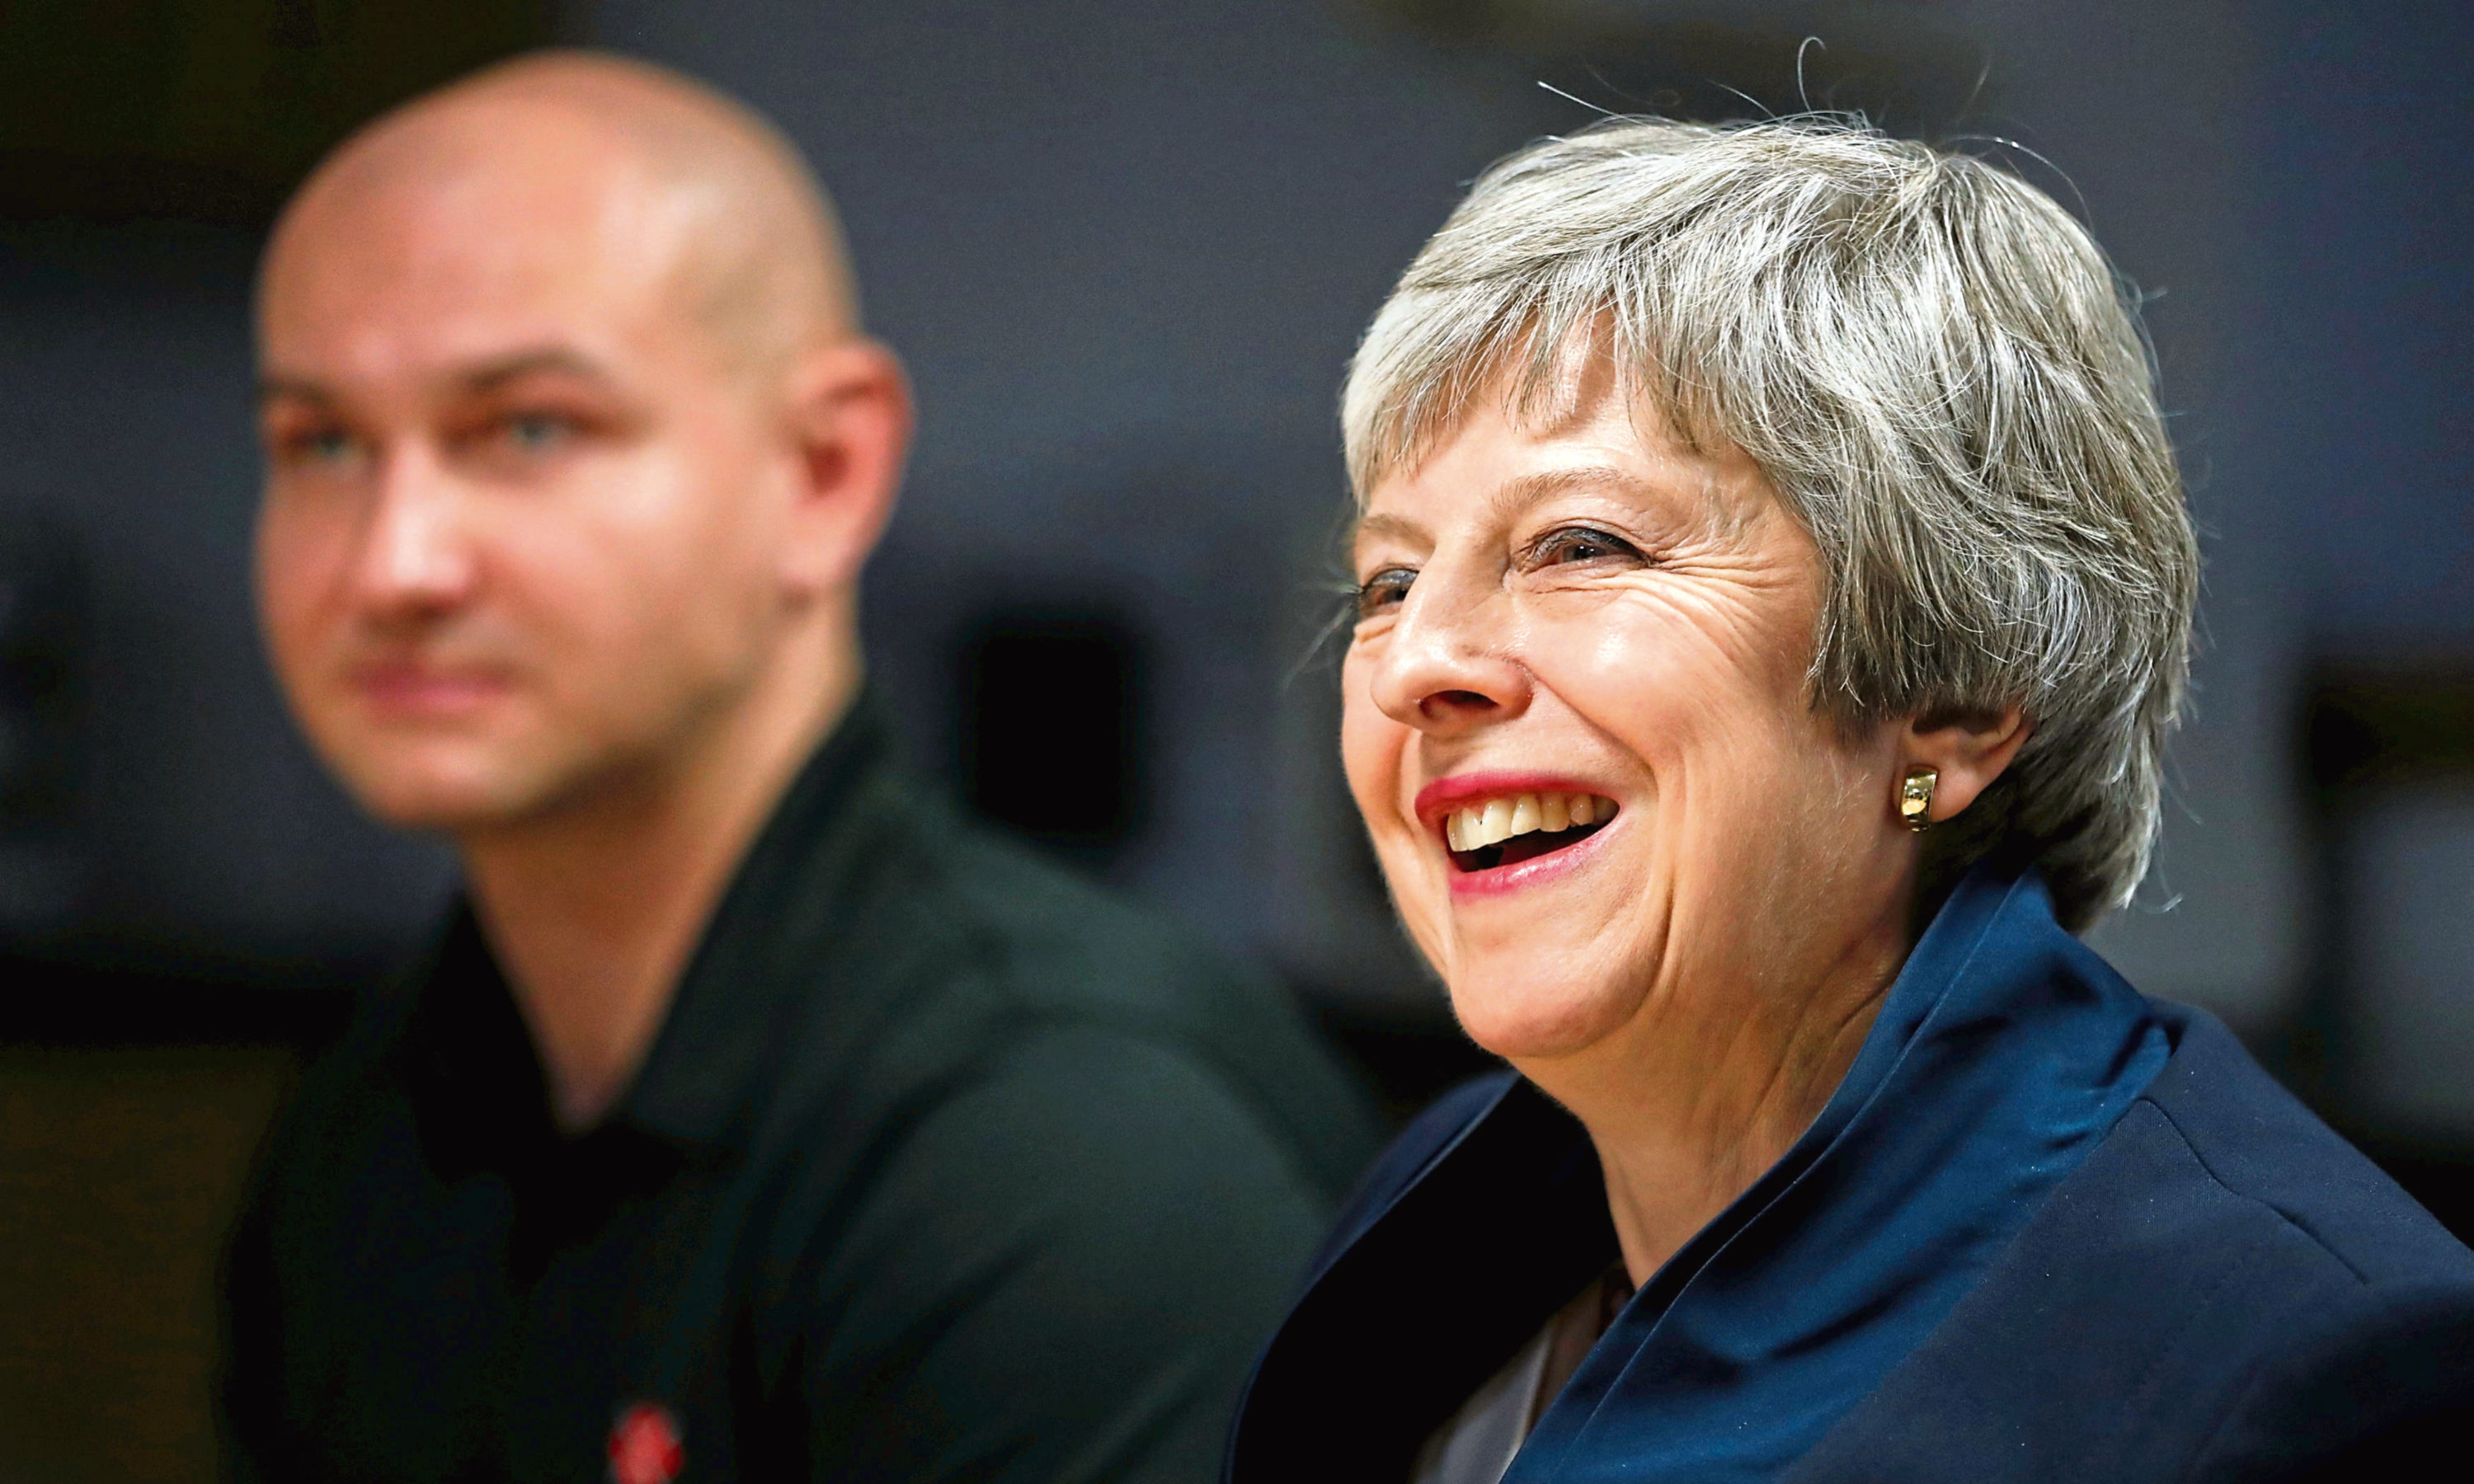 Prime Minister Theresa May during her visit to the Scottish Leather Group Limited, on November 28, 2018 in Bridge of Weir, Scotland.